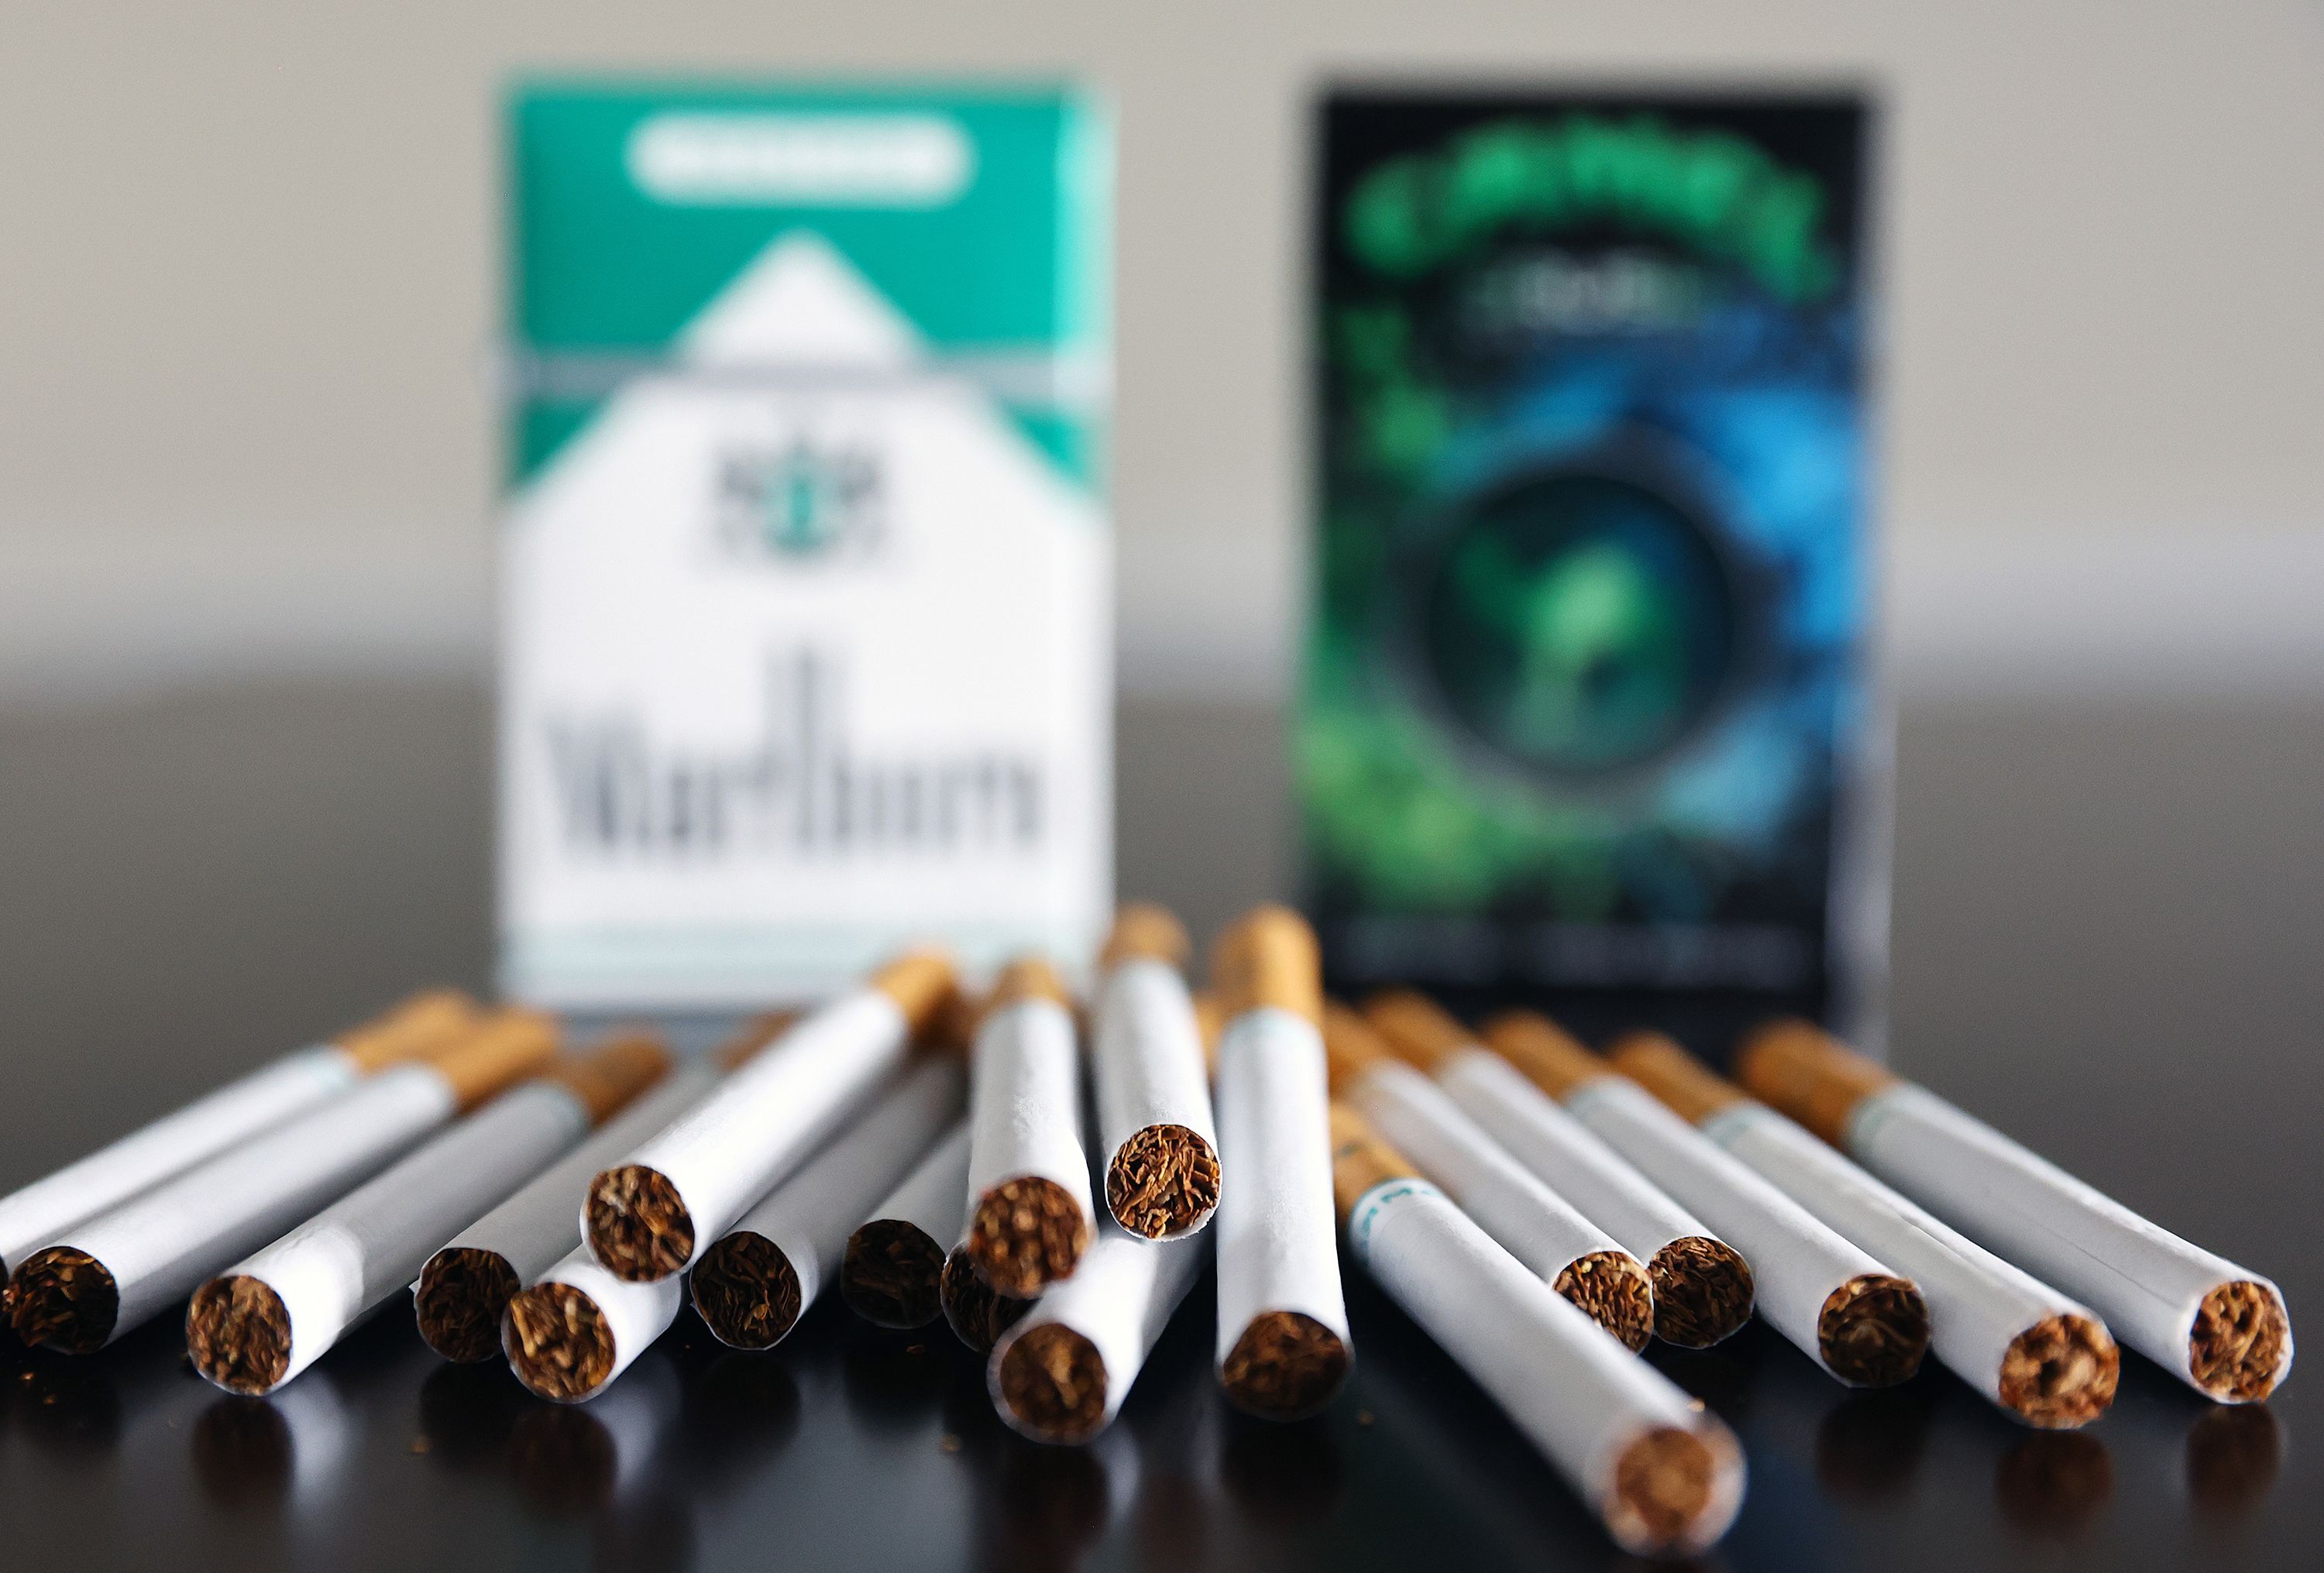 Imperial Tobacco prepares for menthol ban with series of range